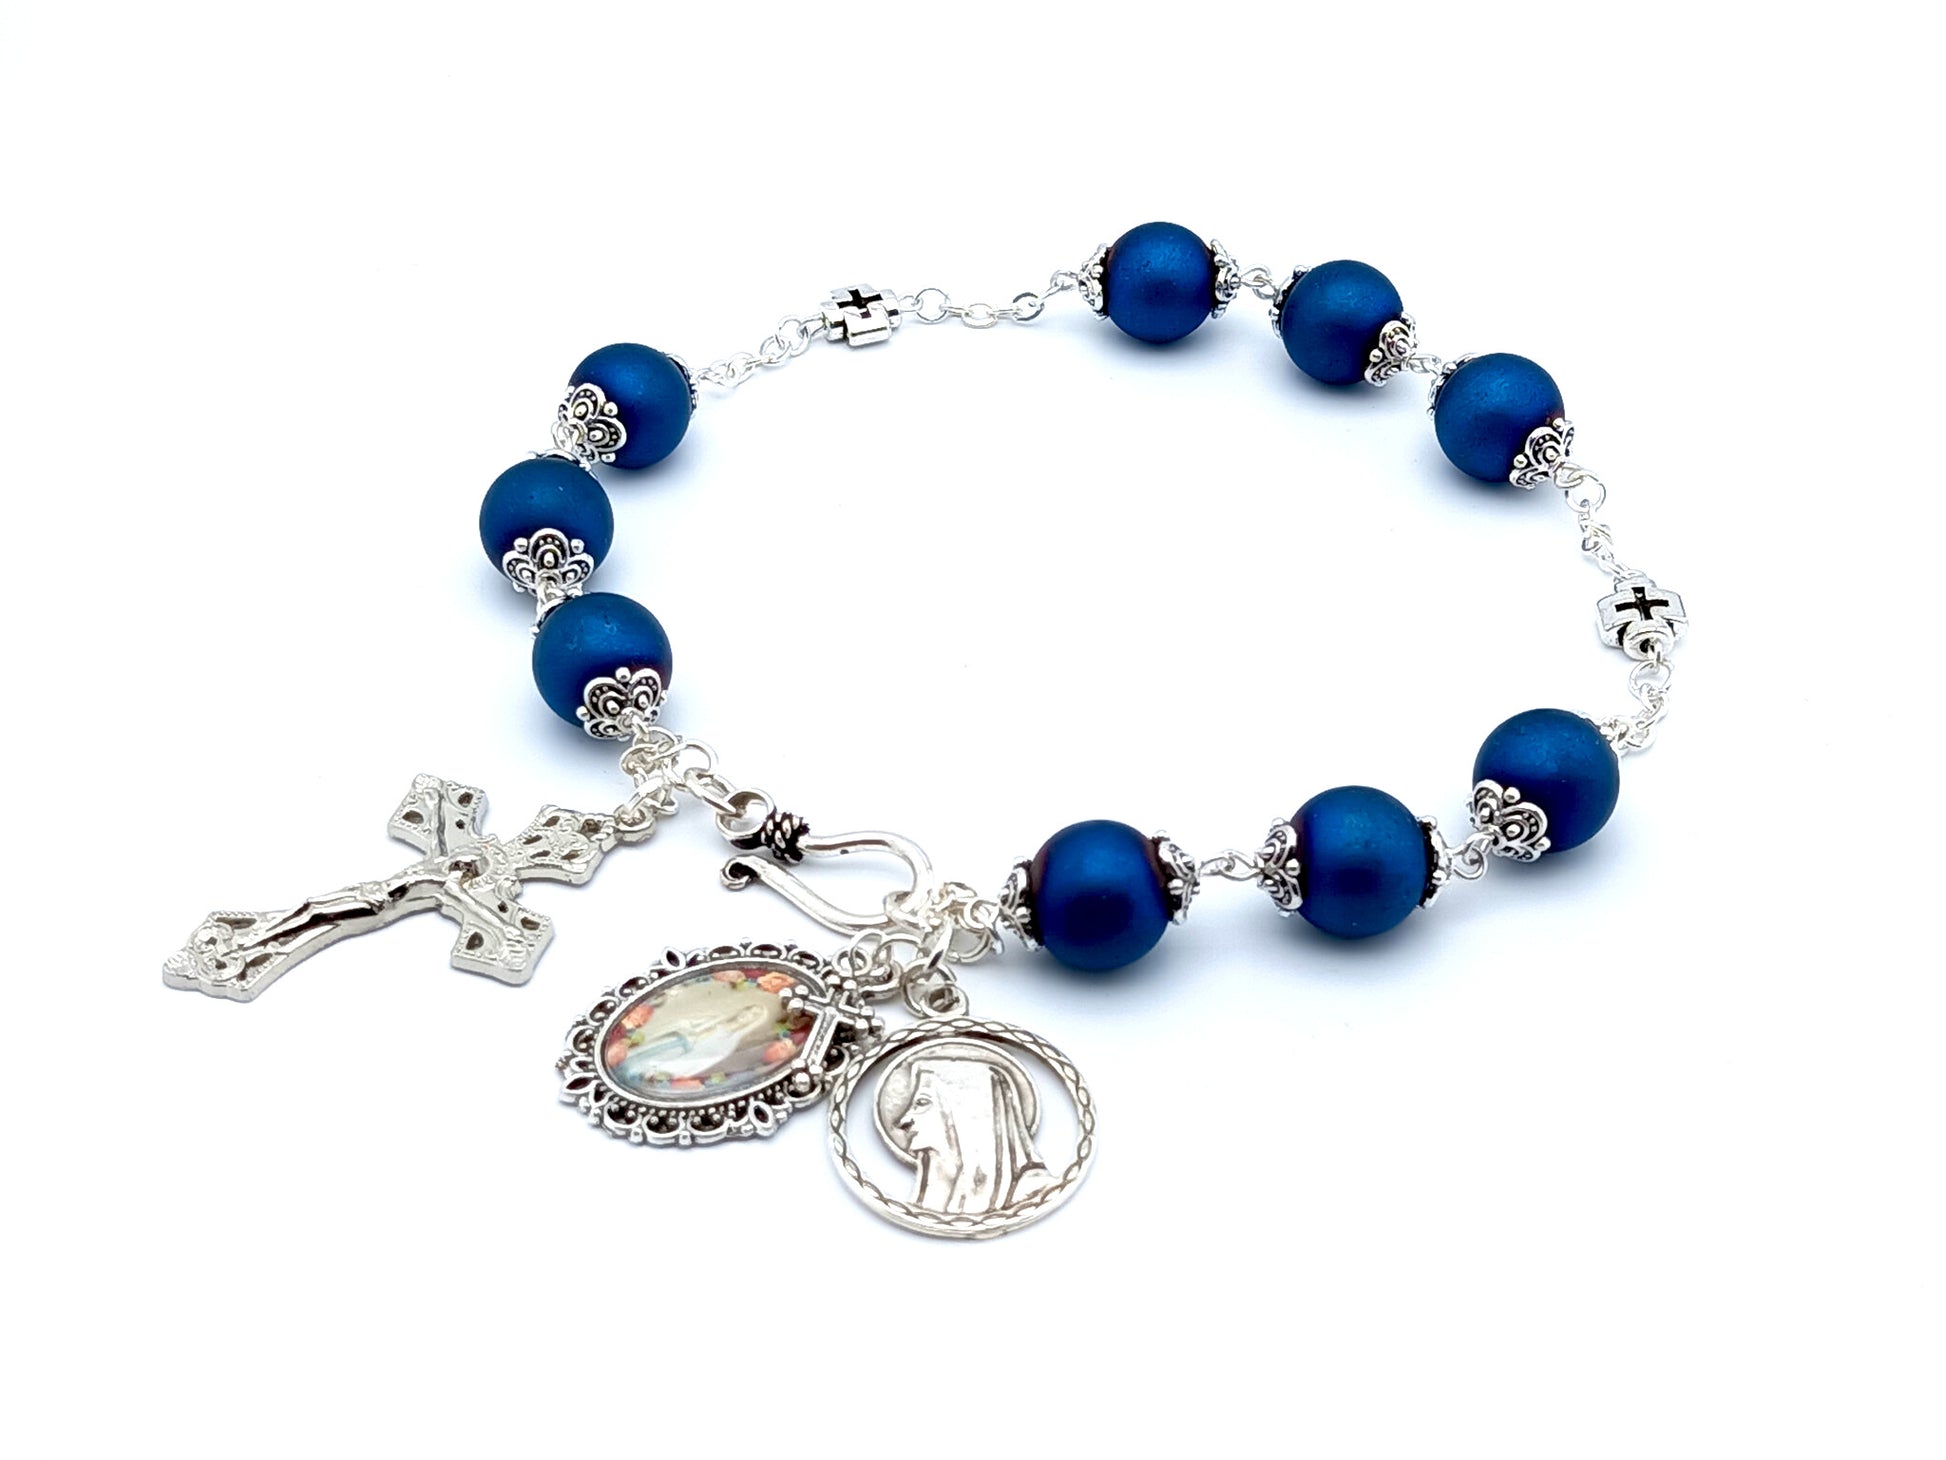 Saint Bernadette unique rosary beads prayer chaplet with blue glass and silver cross beads, silver crucifix and Our Lady of Lourdes picture medal.